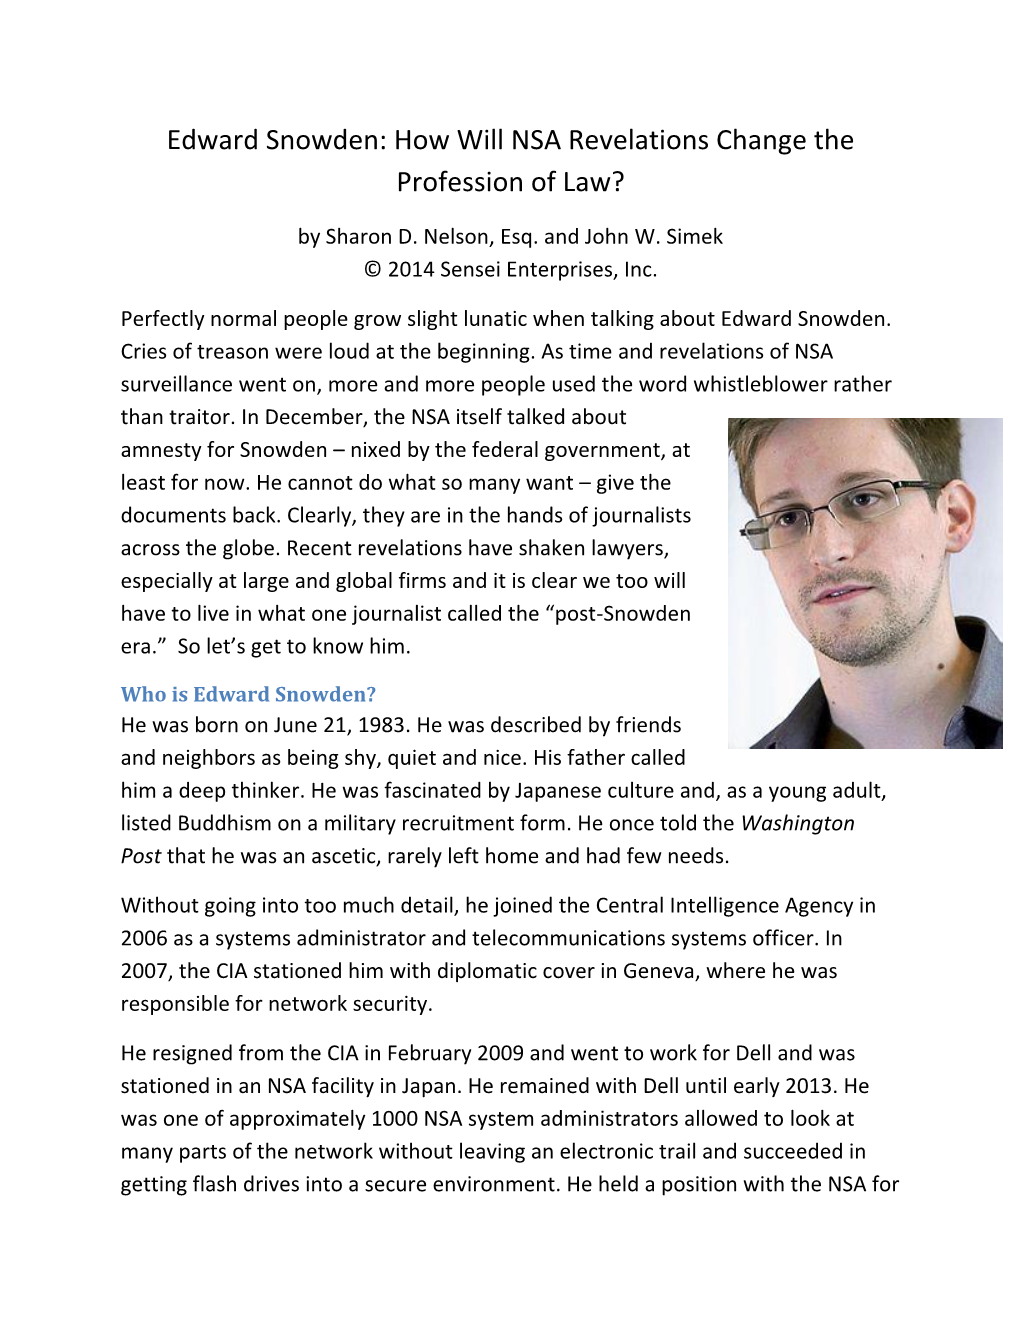 Edward Snowden: How Will NSA Revelations Change the Profession of Law?